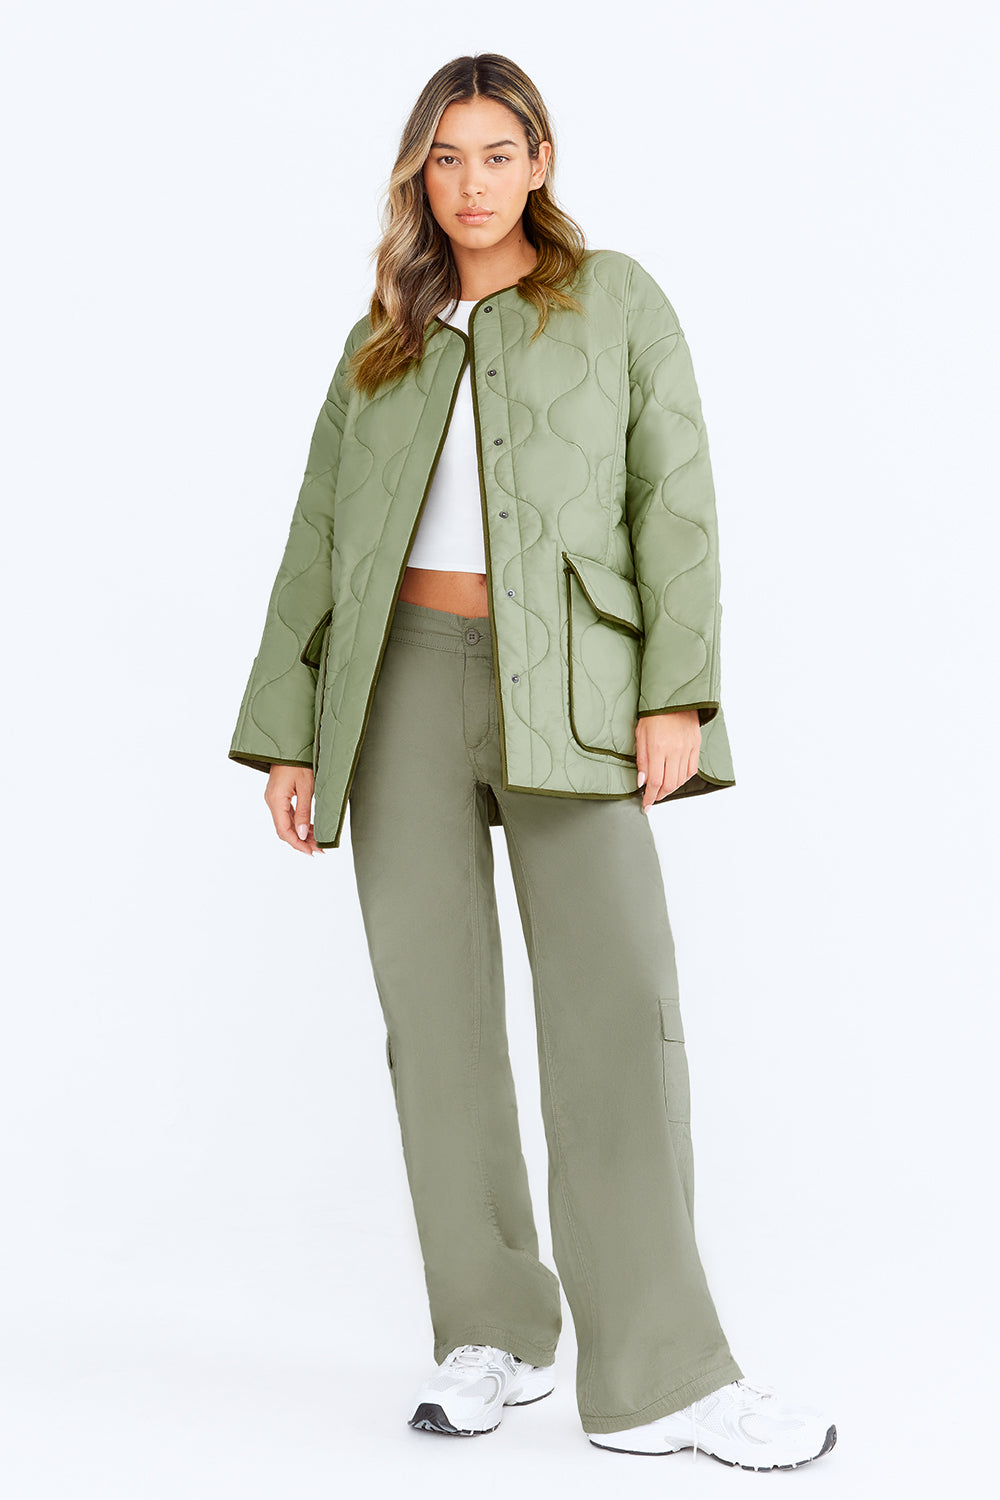 OVERSIZED REVERSIBLE QUILTED JACKET- LIGHT OLIVE AND ARMY GREEN – TALA